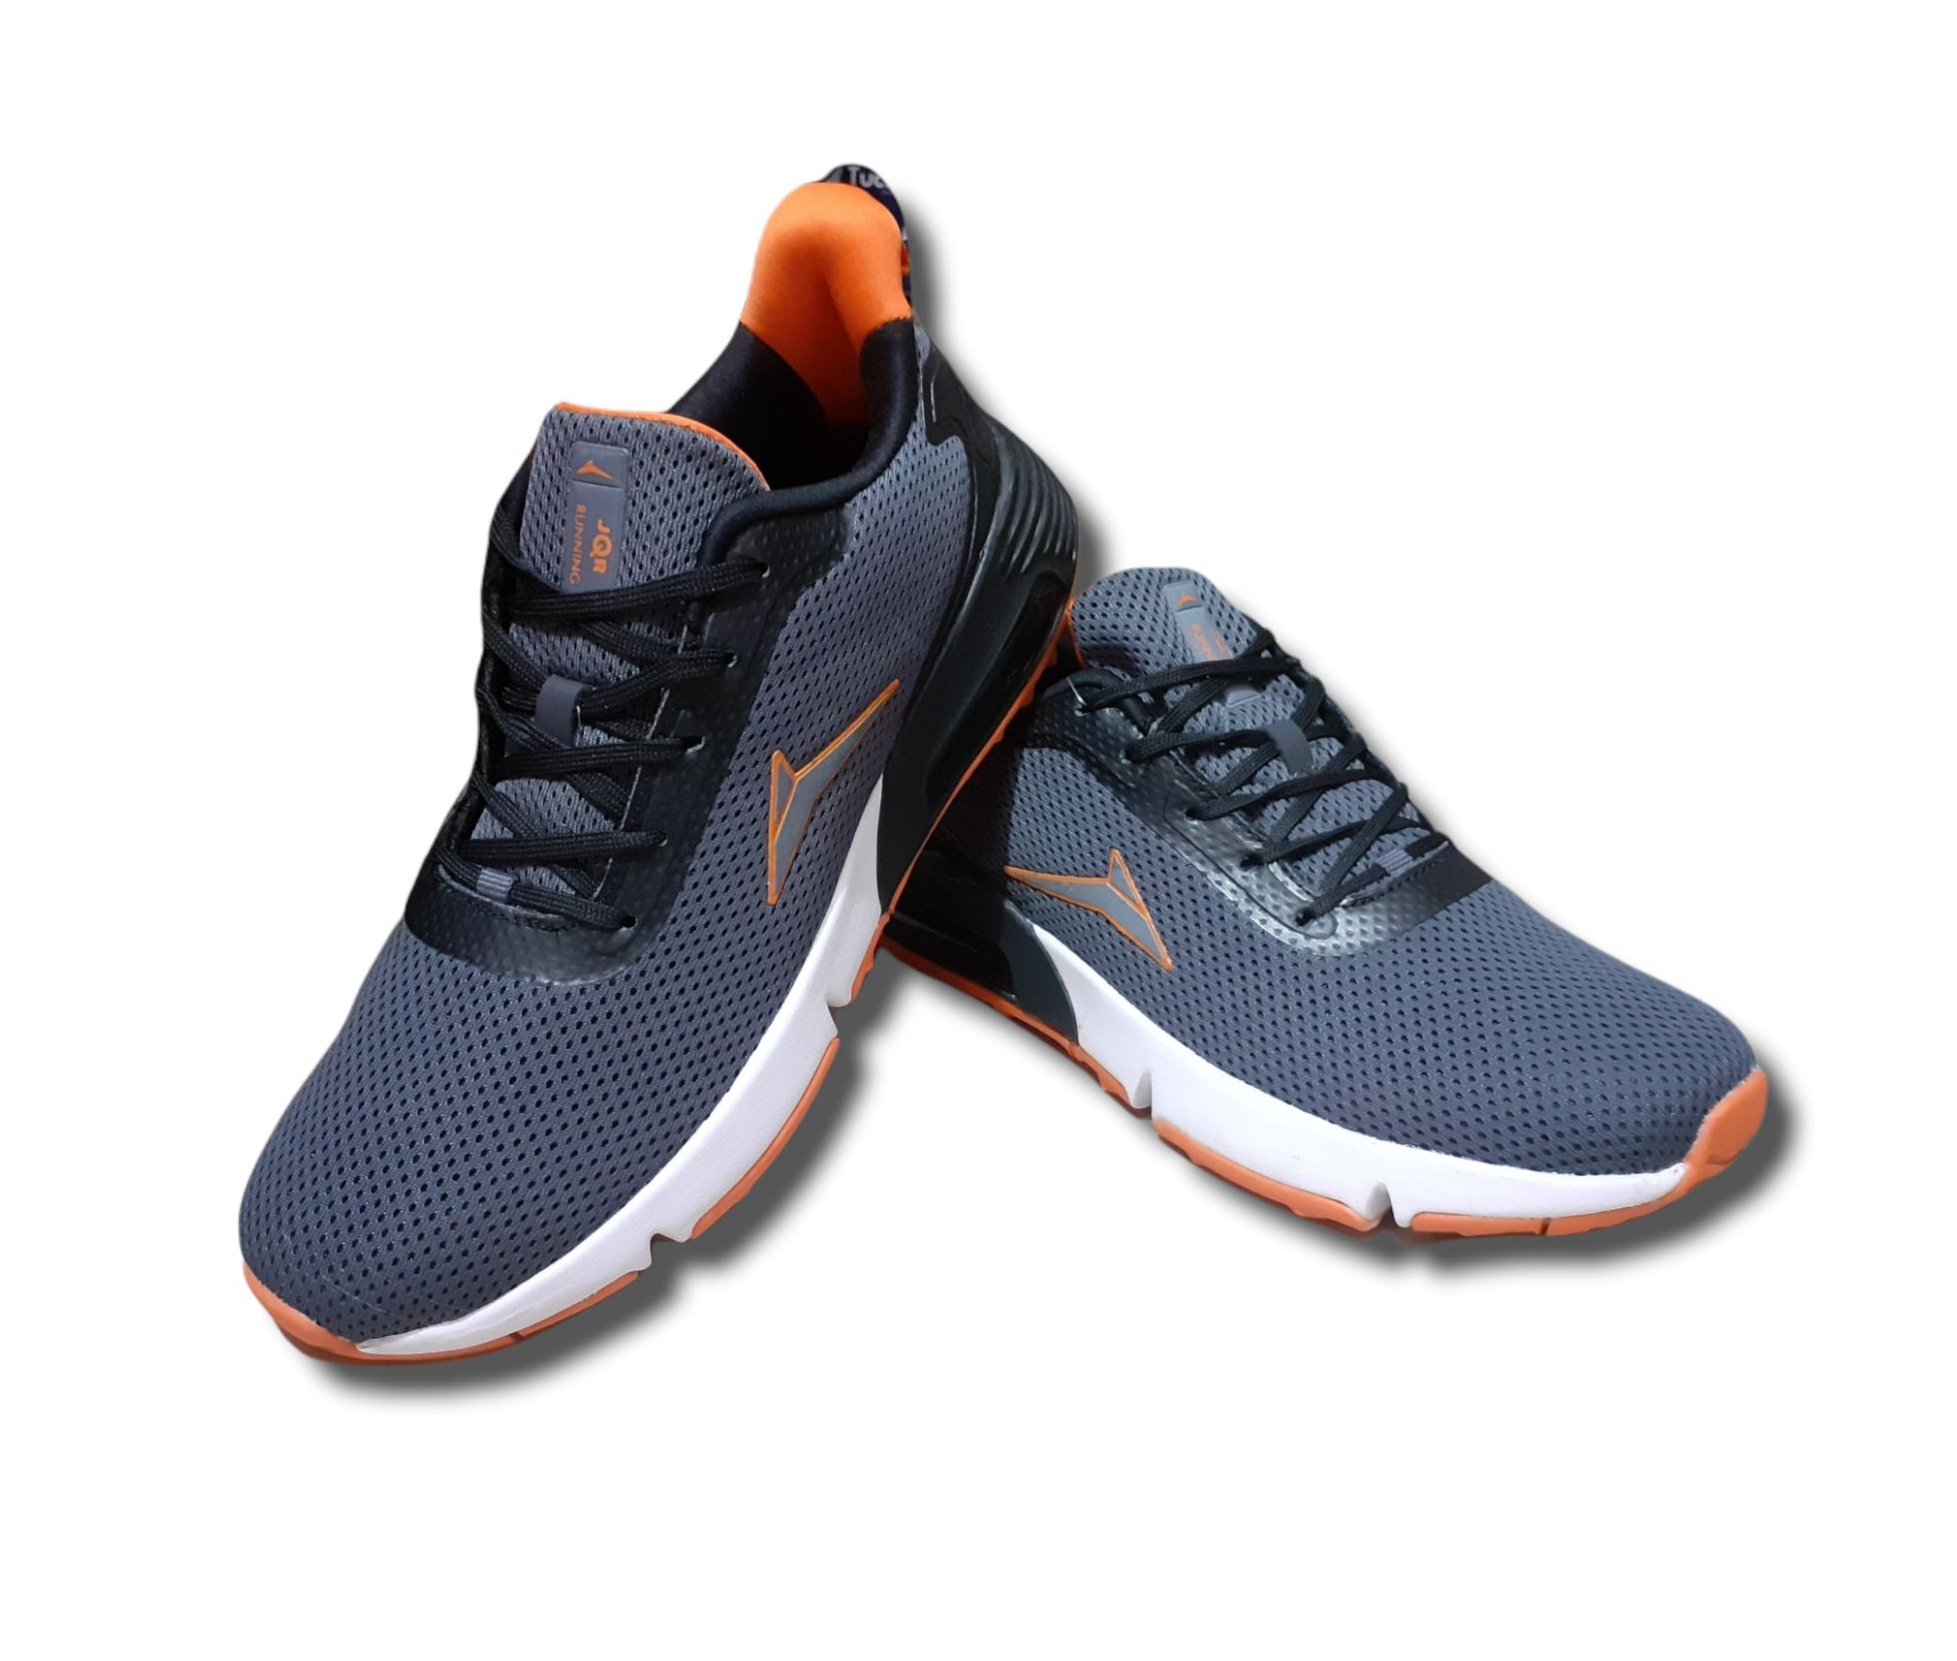 Buy JQR 2020 Sports Running walking Gym training lightweight Stylish shoes  Online at Best Prices in India - JioMart.